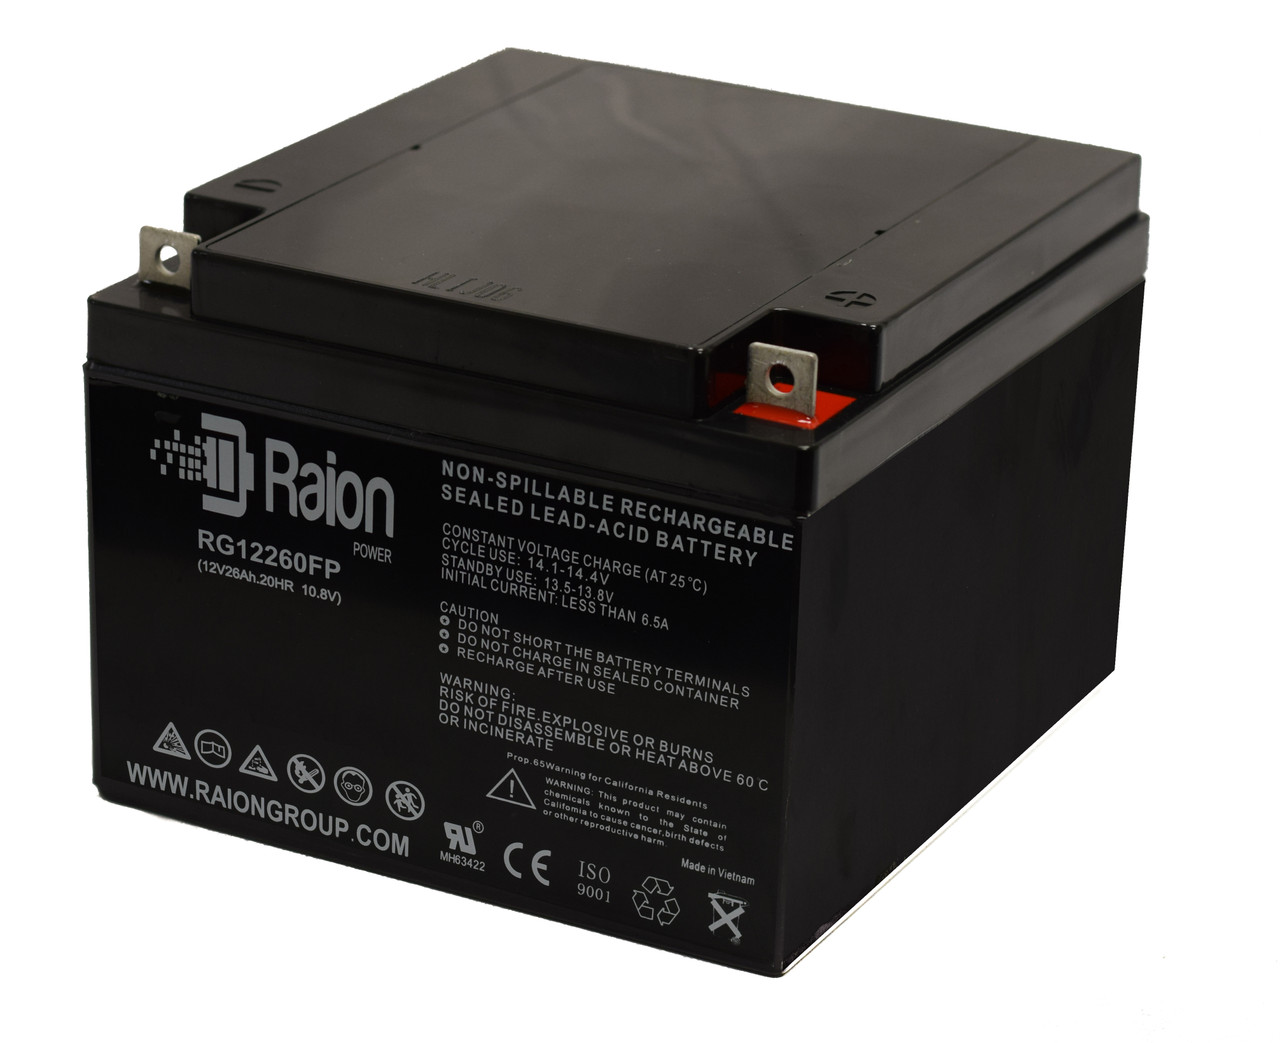 Raion Power Replacement 12V 26Ah Battery for Picker International Gamma Camera - 1 Pack